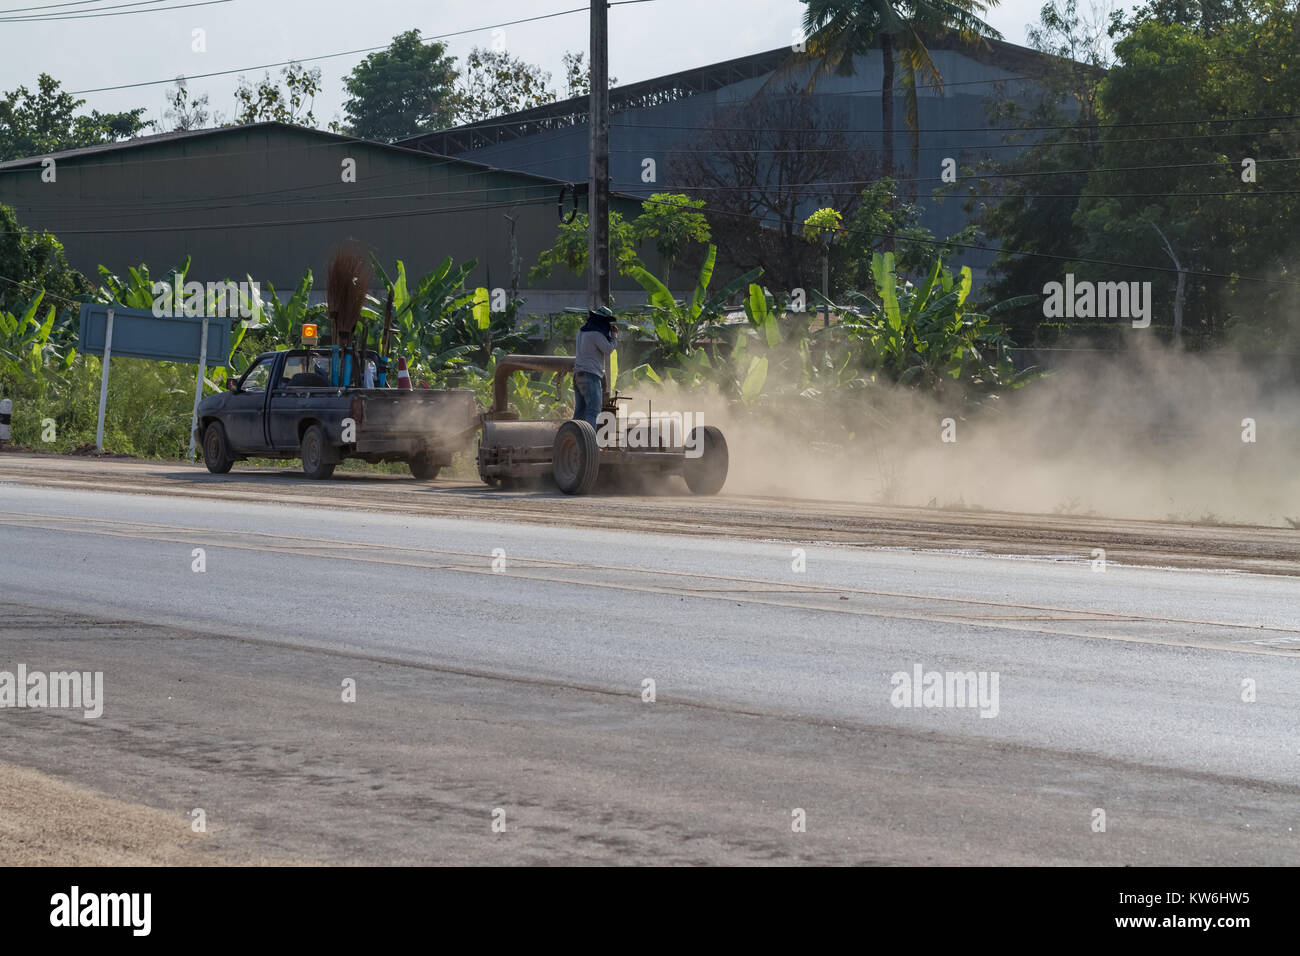 In Thailand this industrial street sweeper is pulled by a car Stock Photo